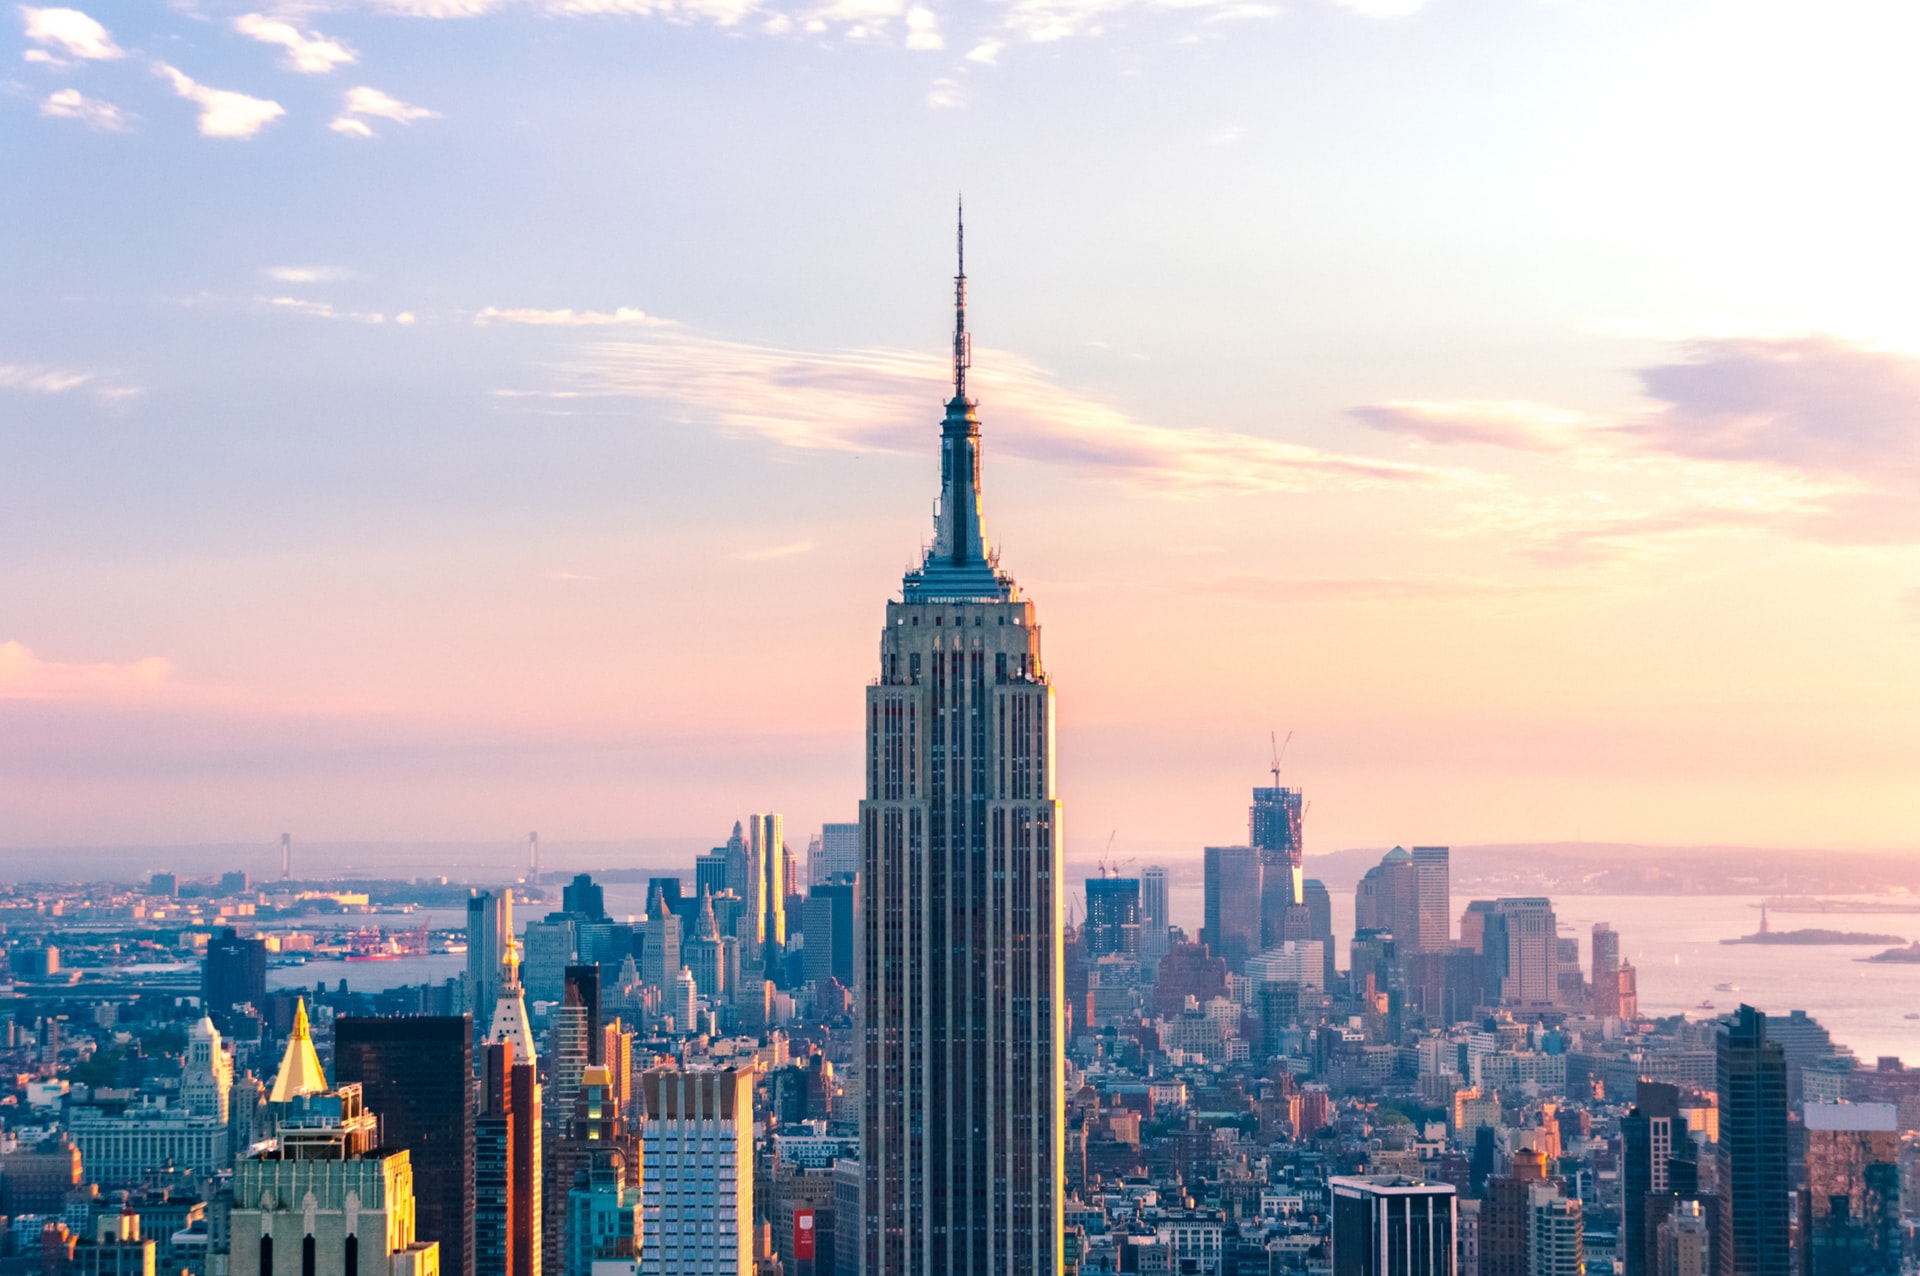 New york tallest building (10 interesting facts about new york in 2022)